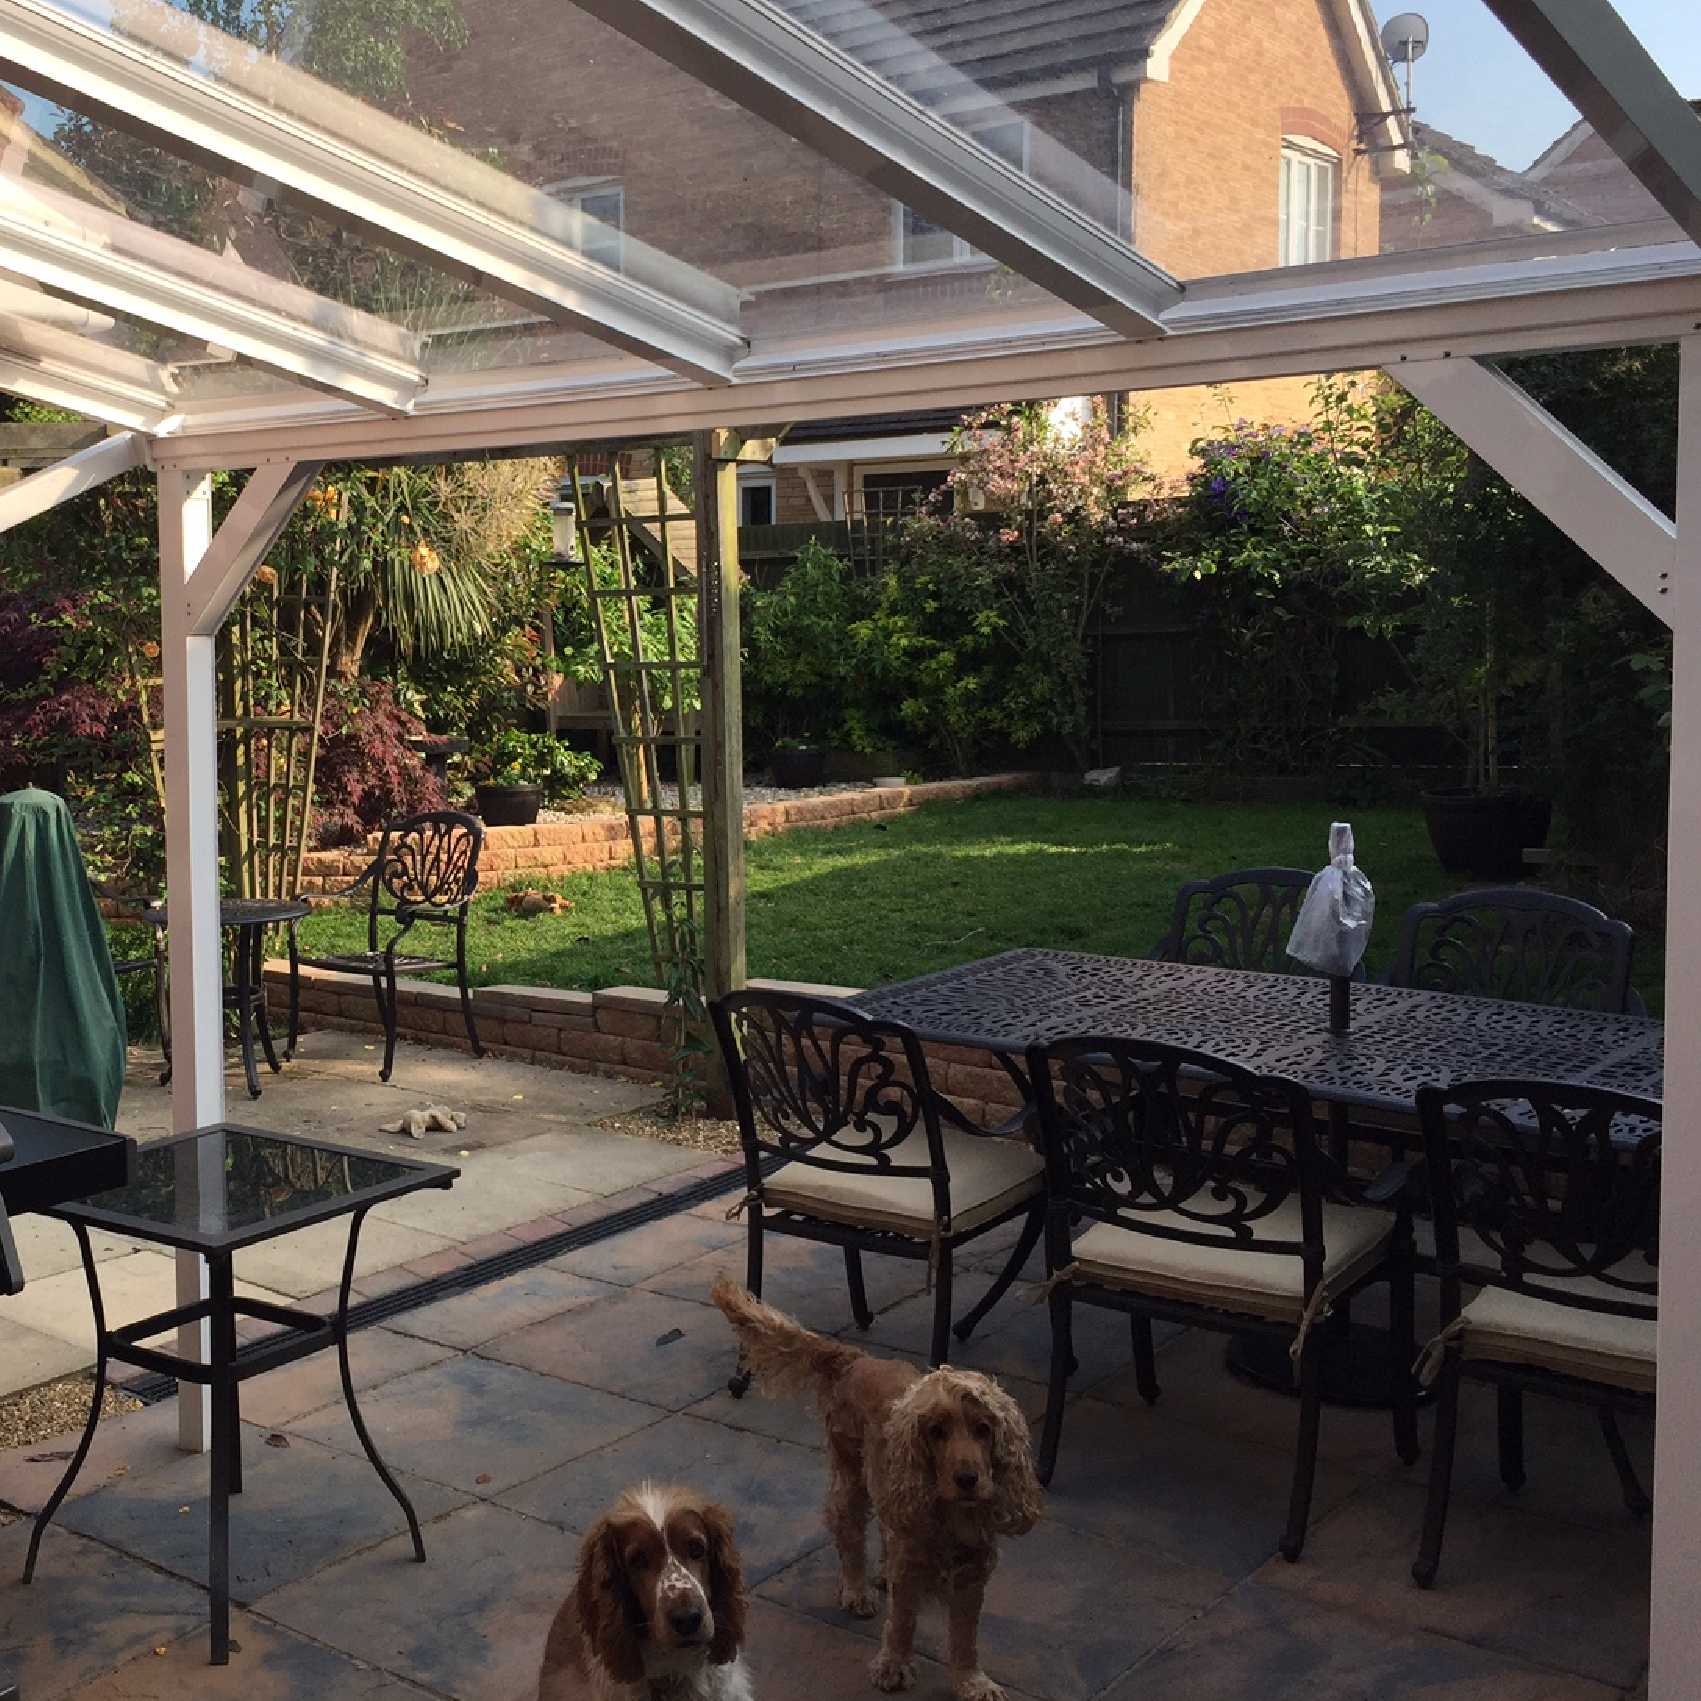 Affordable Omega Smart Lean-To Canopy, White UNGLAZED for 6mm Glazing - 2.1m (W) x 1.5m (P), (2) Supporting Posts